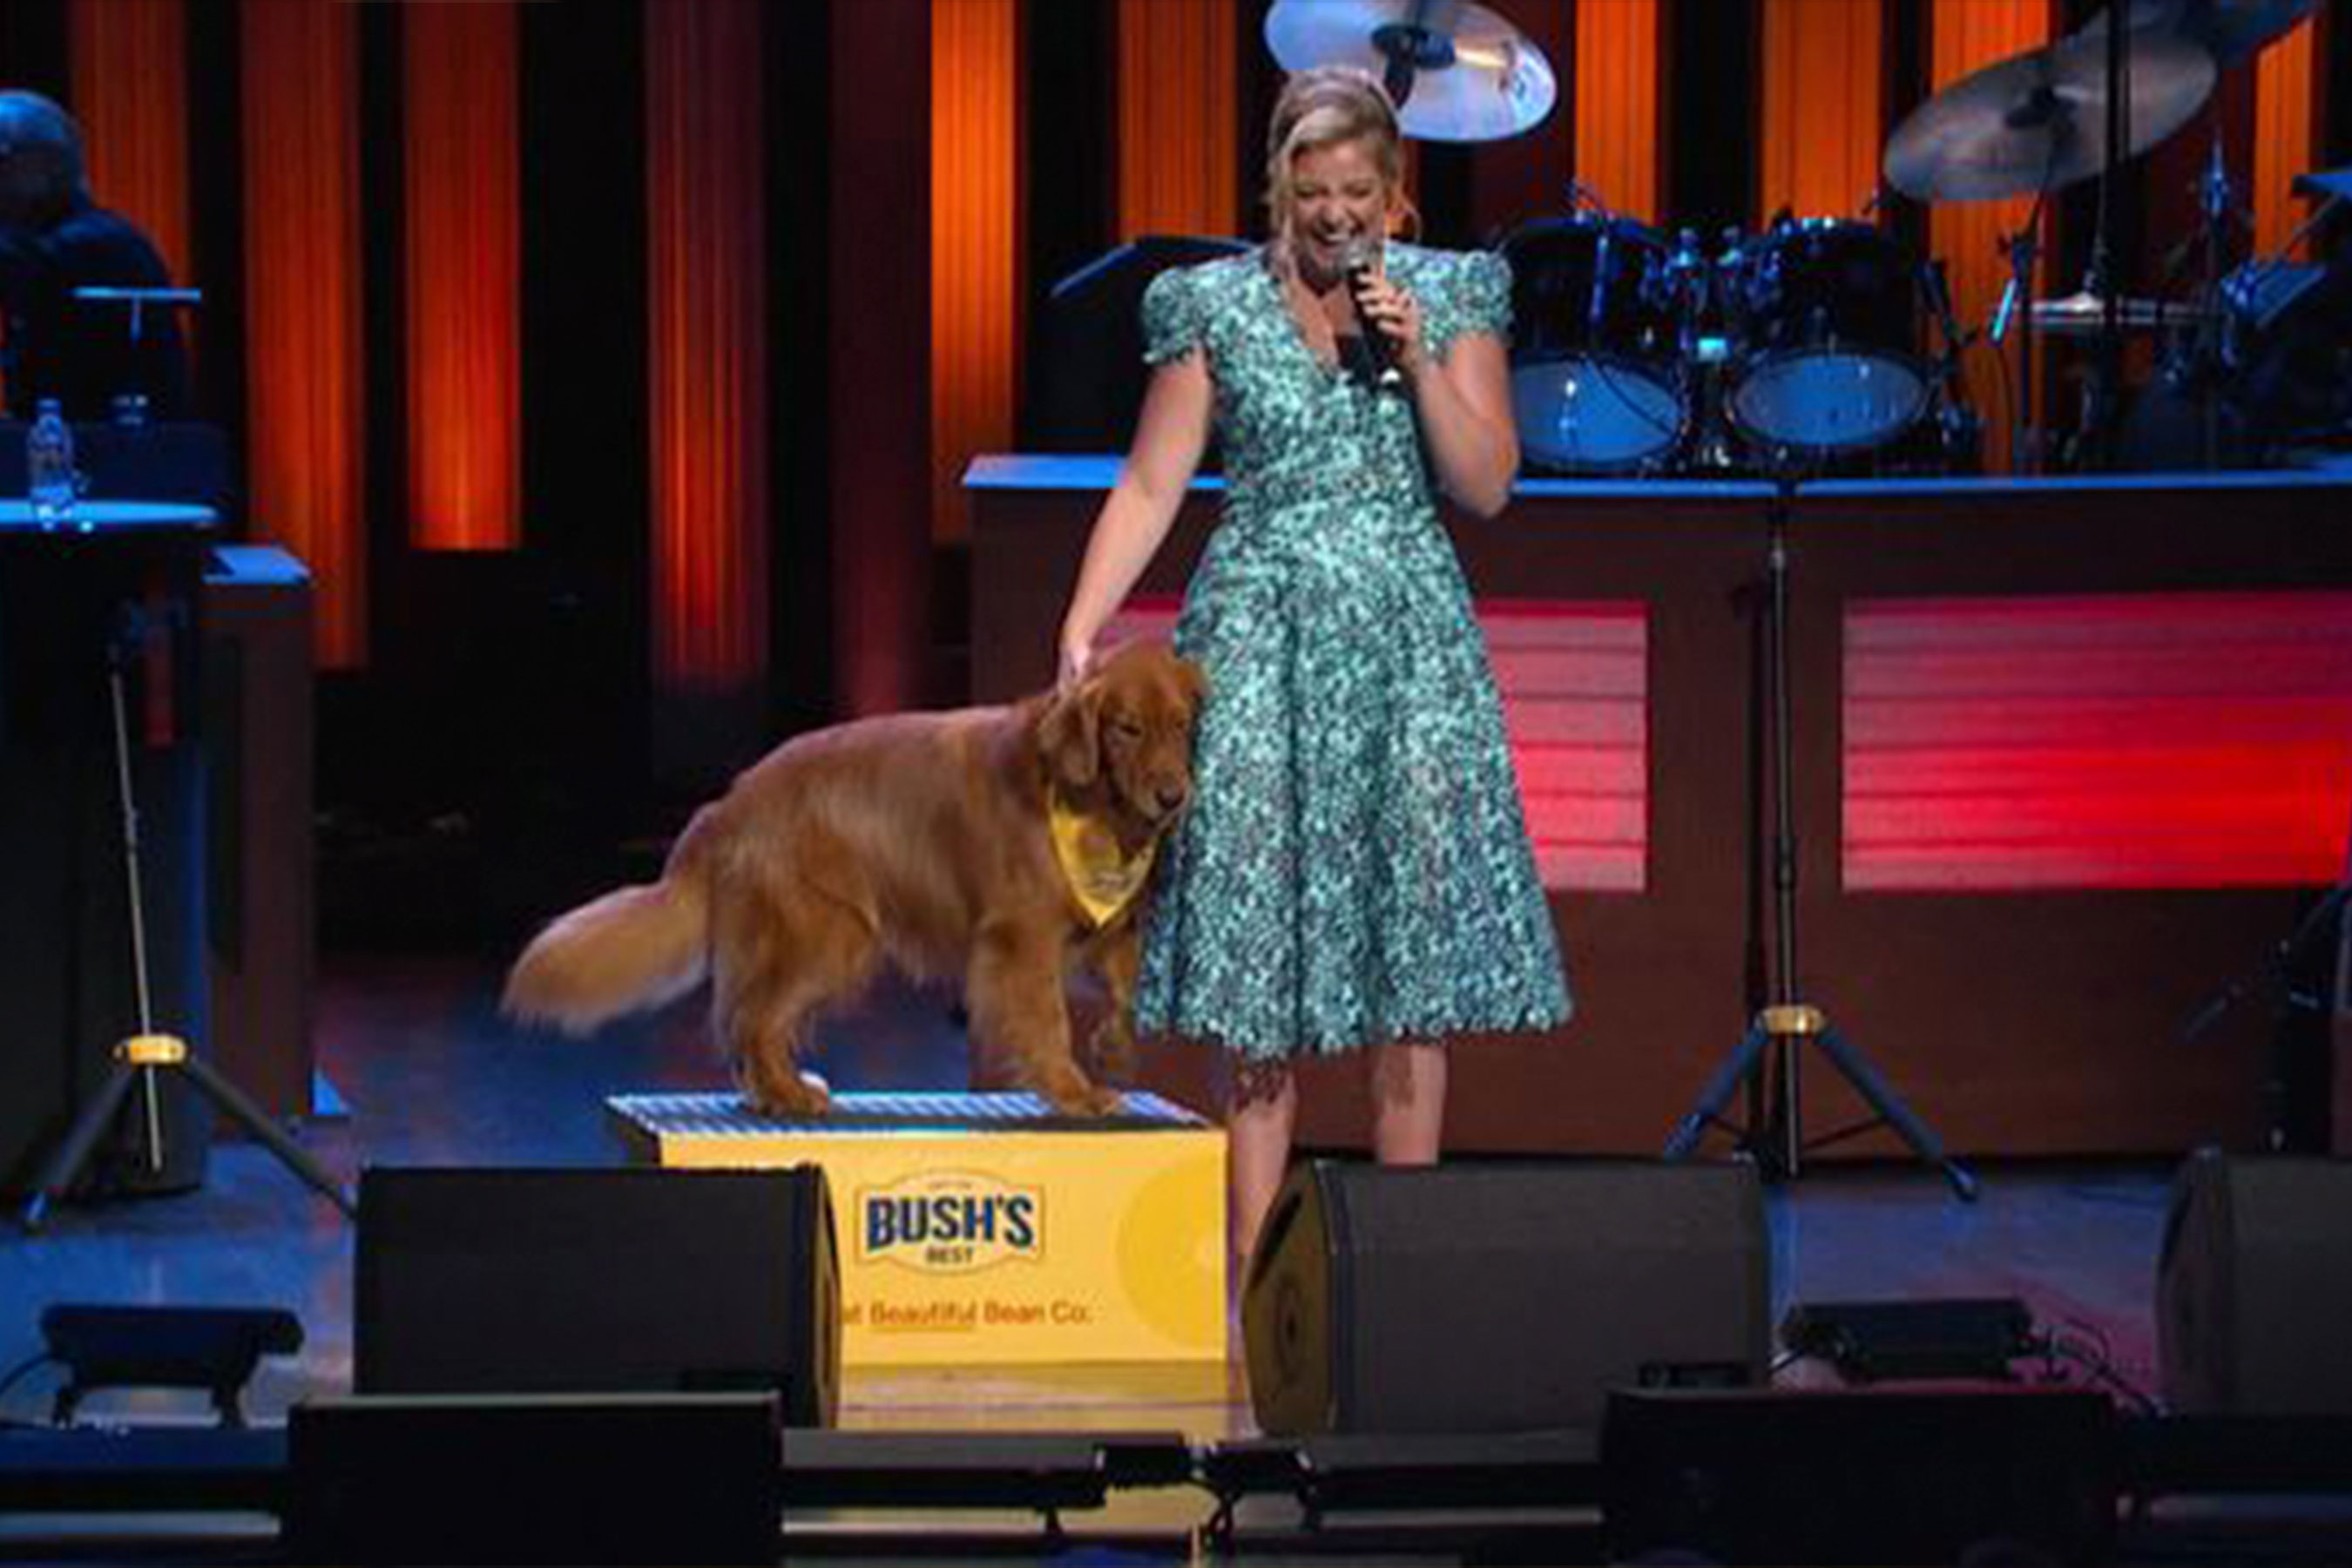 Bush's Beans Spokes-Dog, Duke, Makes History with Debut at Grand Ole Opry